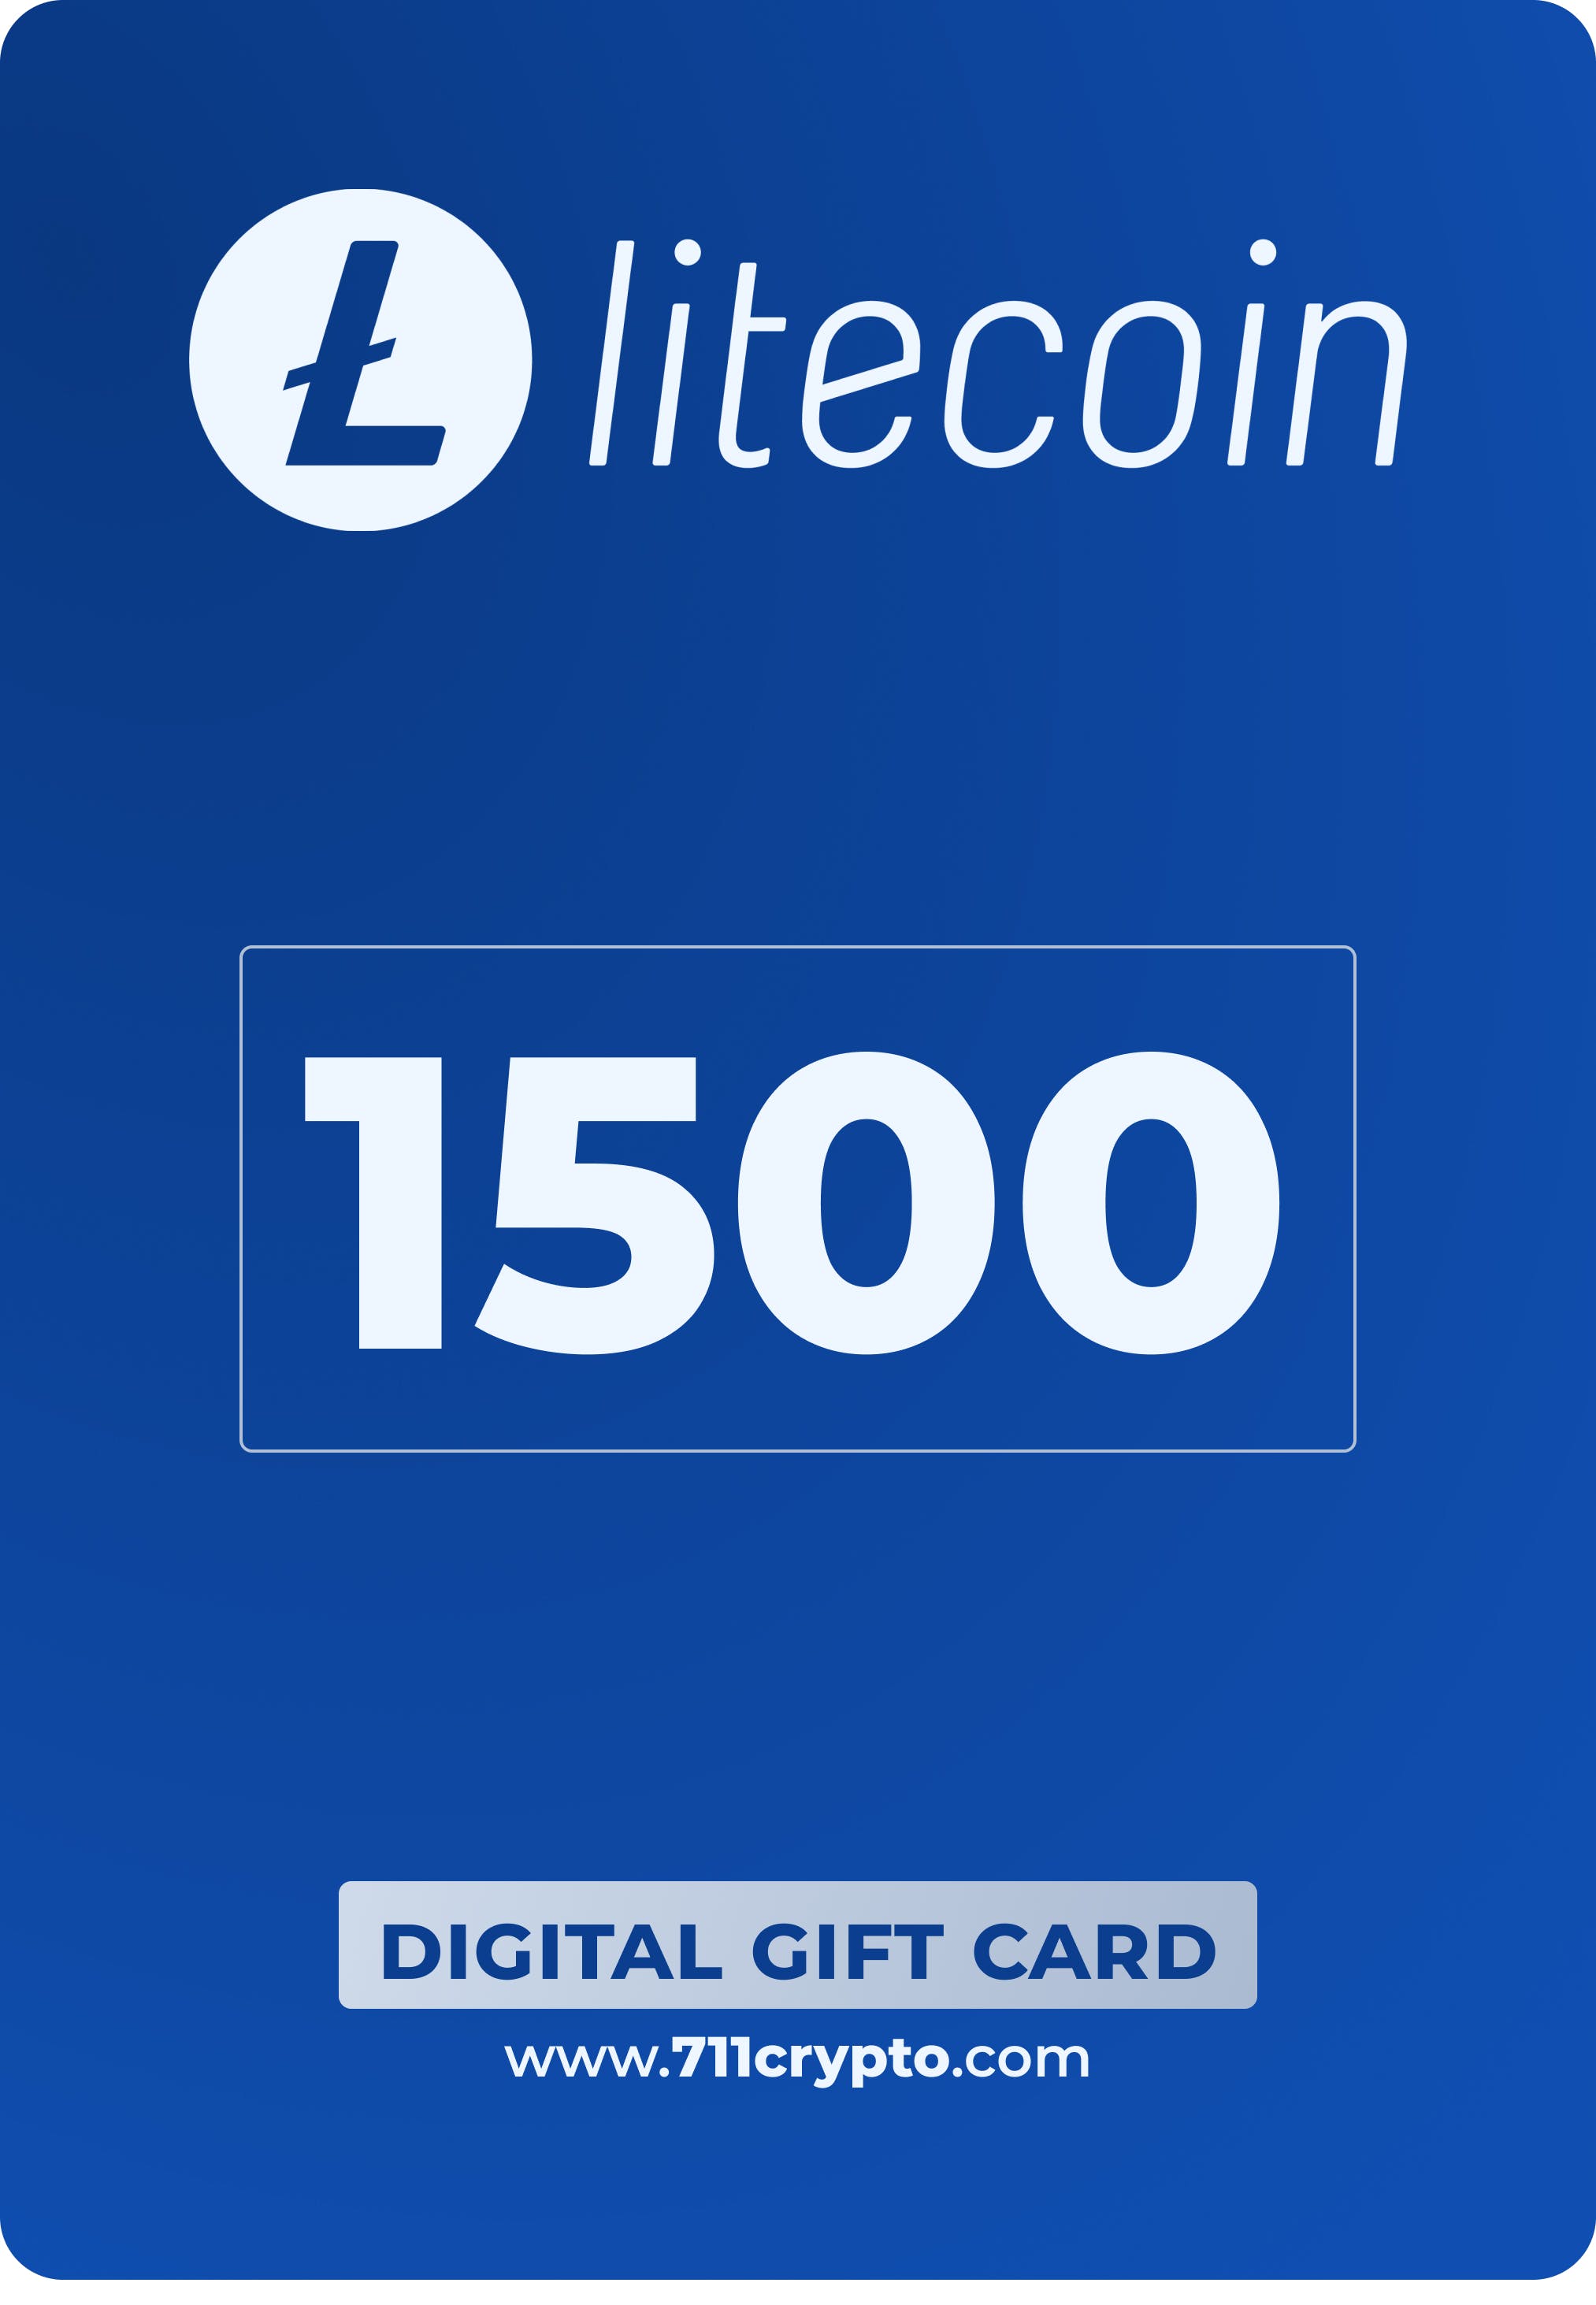 does crypto.com have gift cards